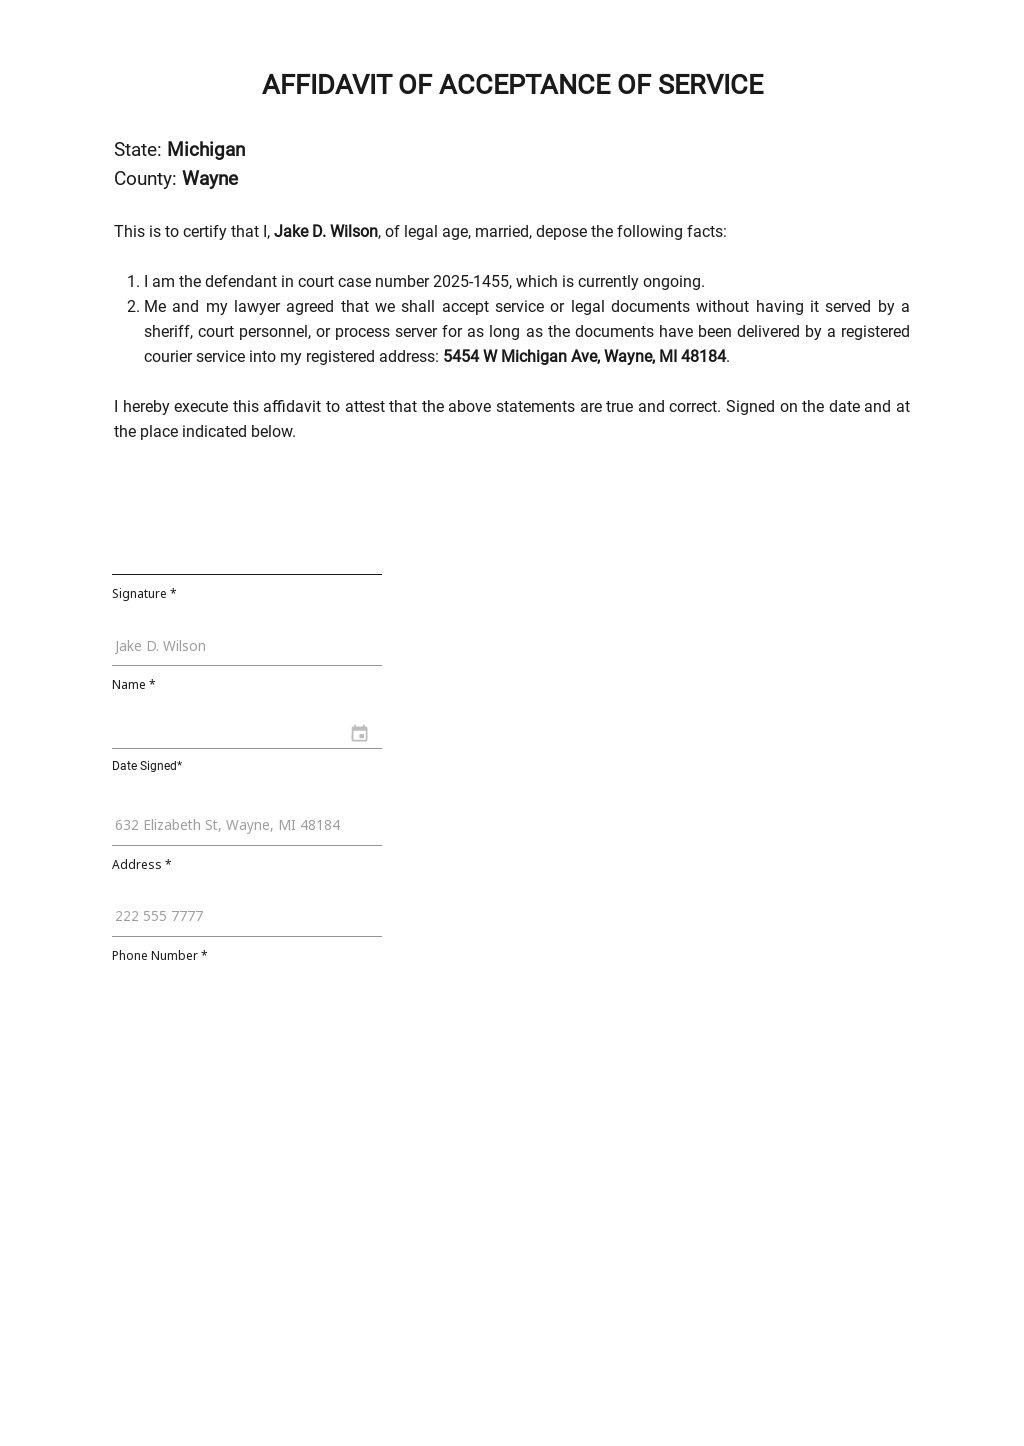 Affidavit of Acceptance of Service Template in Word, Google Docs